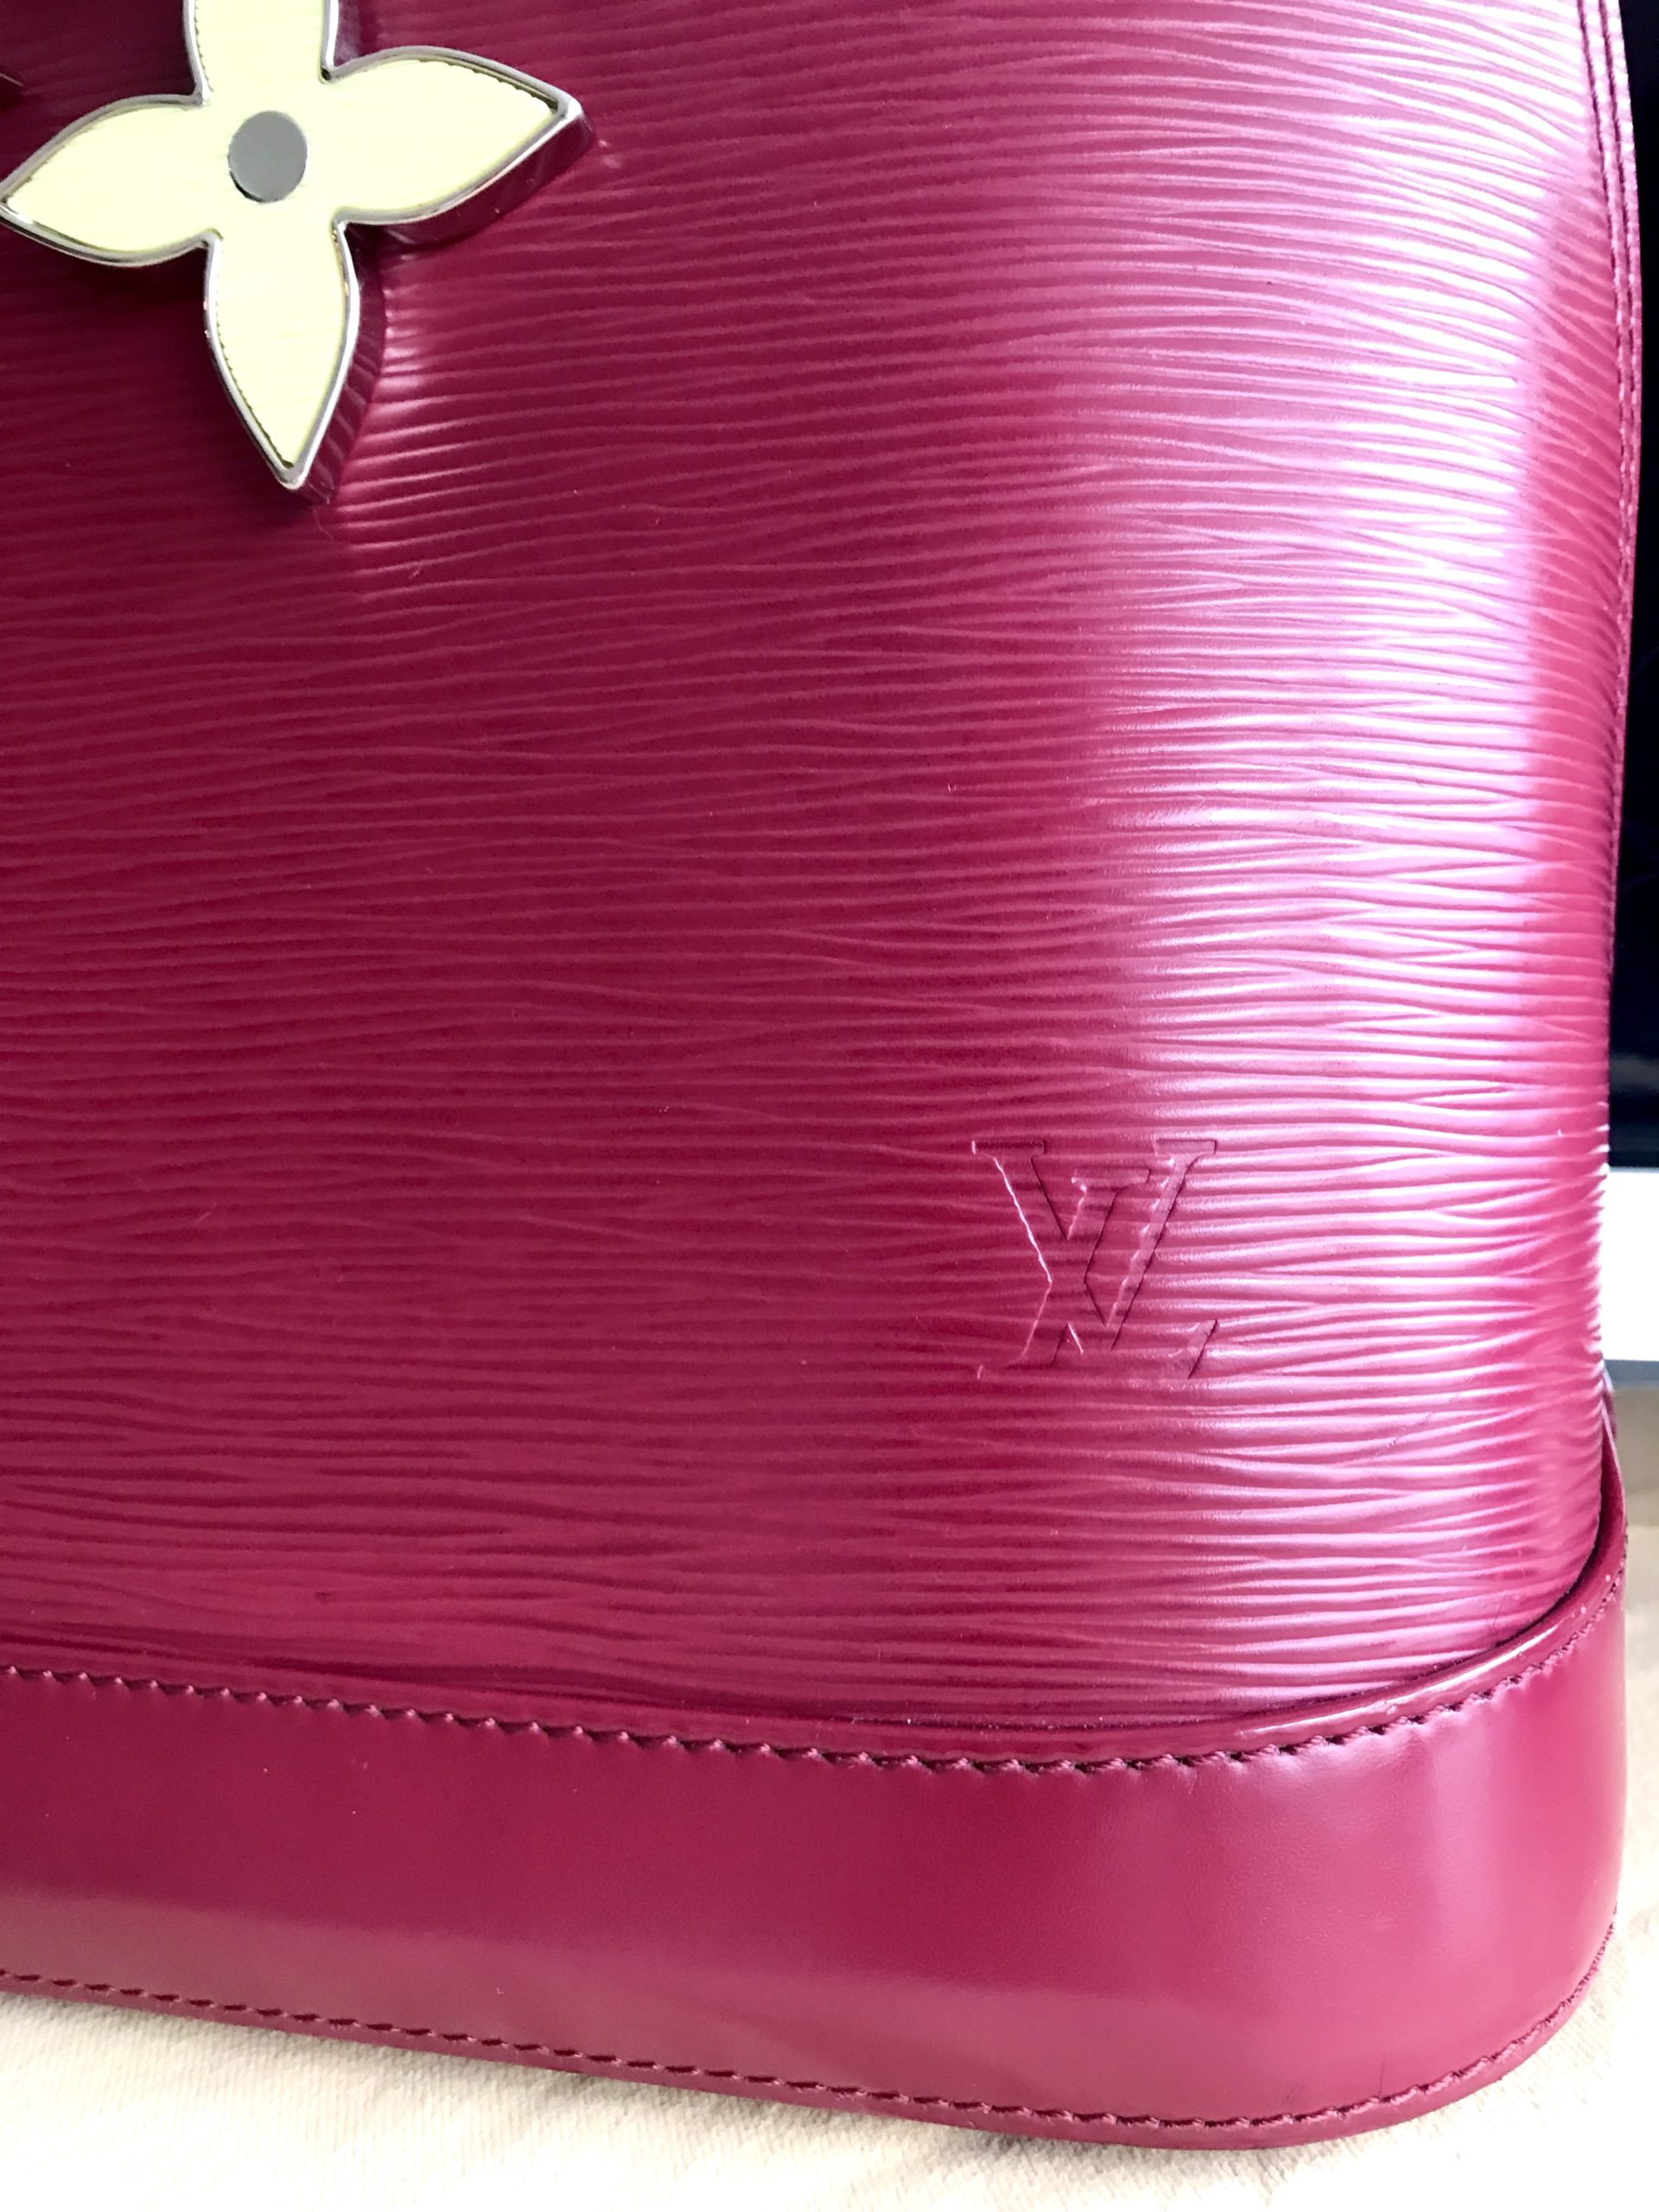 Alma leather handbag Louis Vuitton Pink in Leather - 29244928